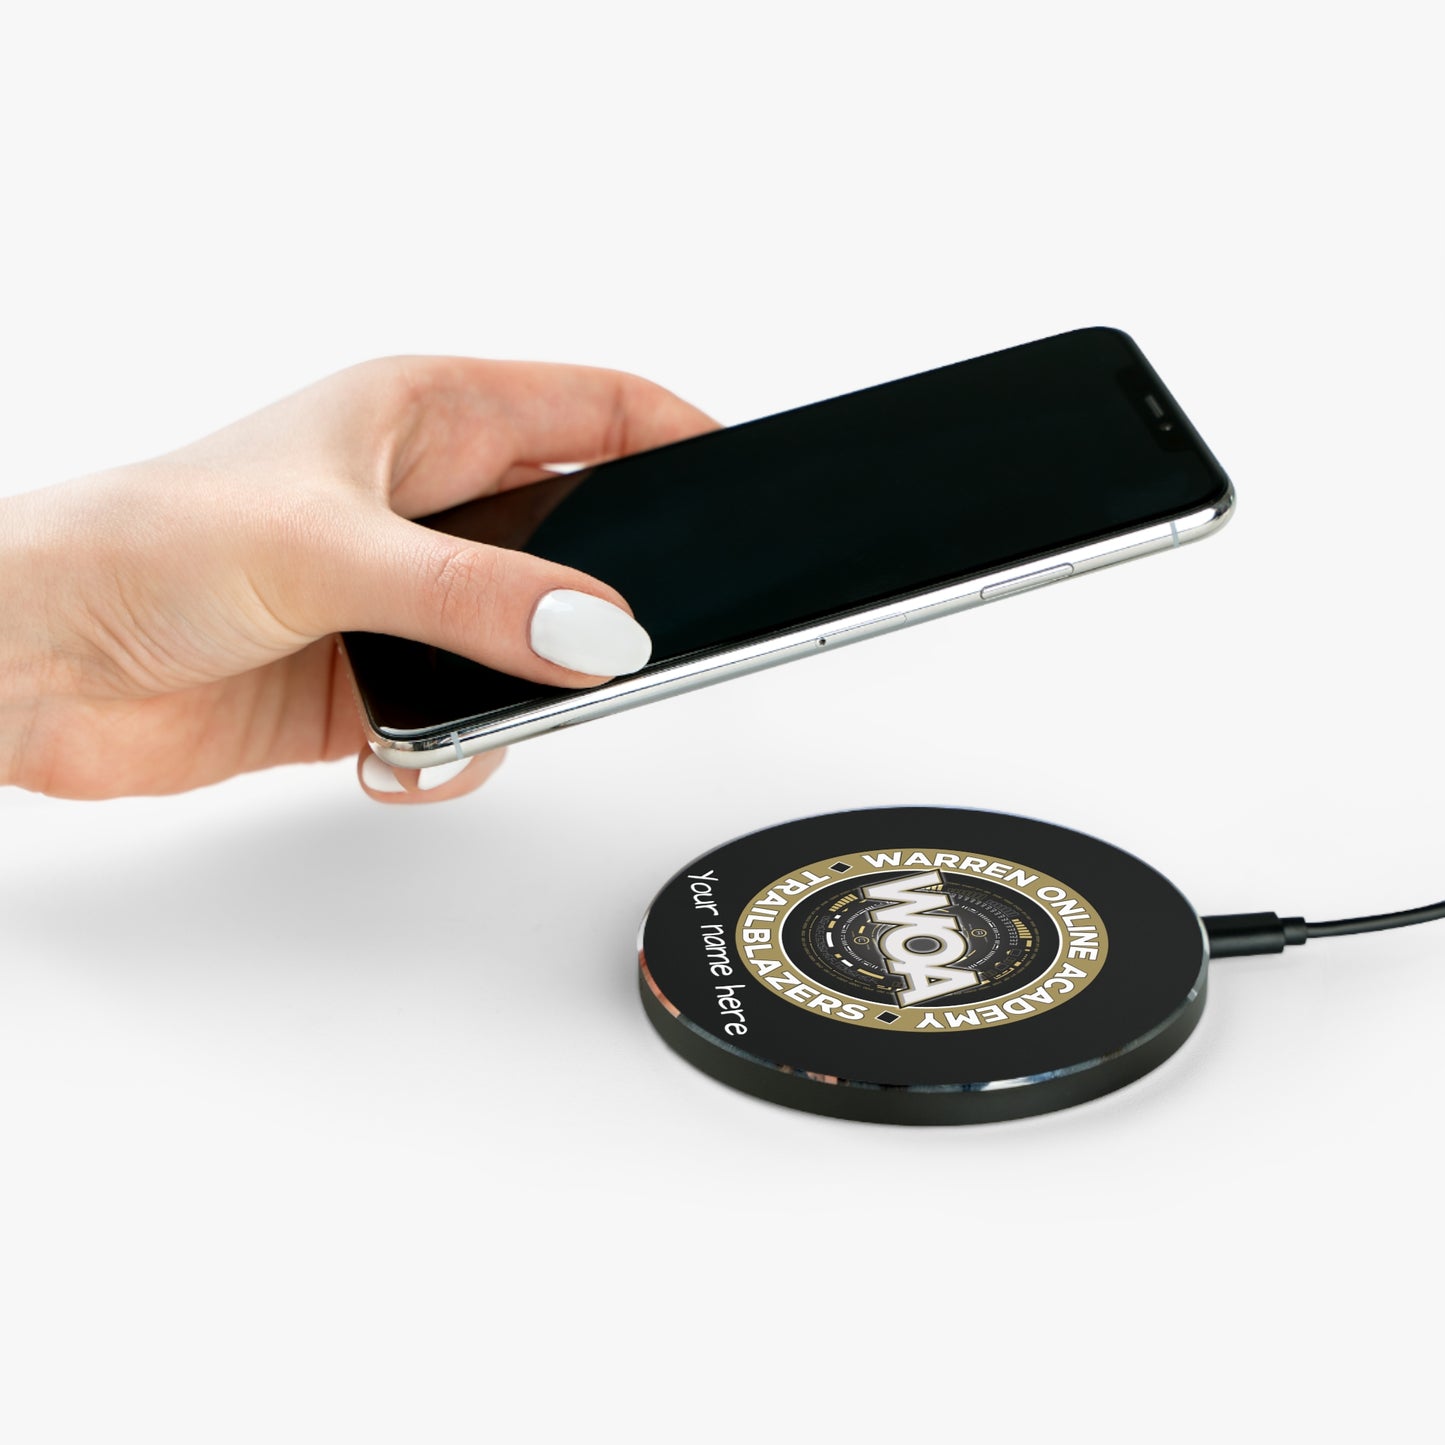 WOA Personalized Wireless Charger with LED Lights | FREE SHIPPING!